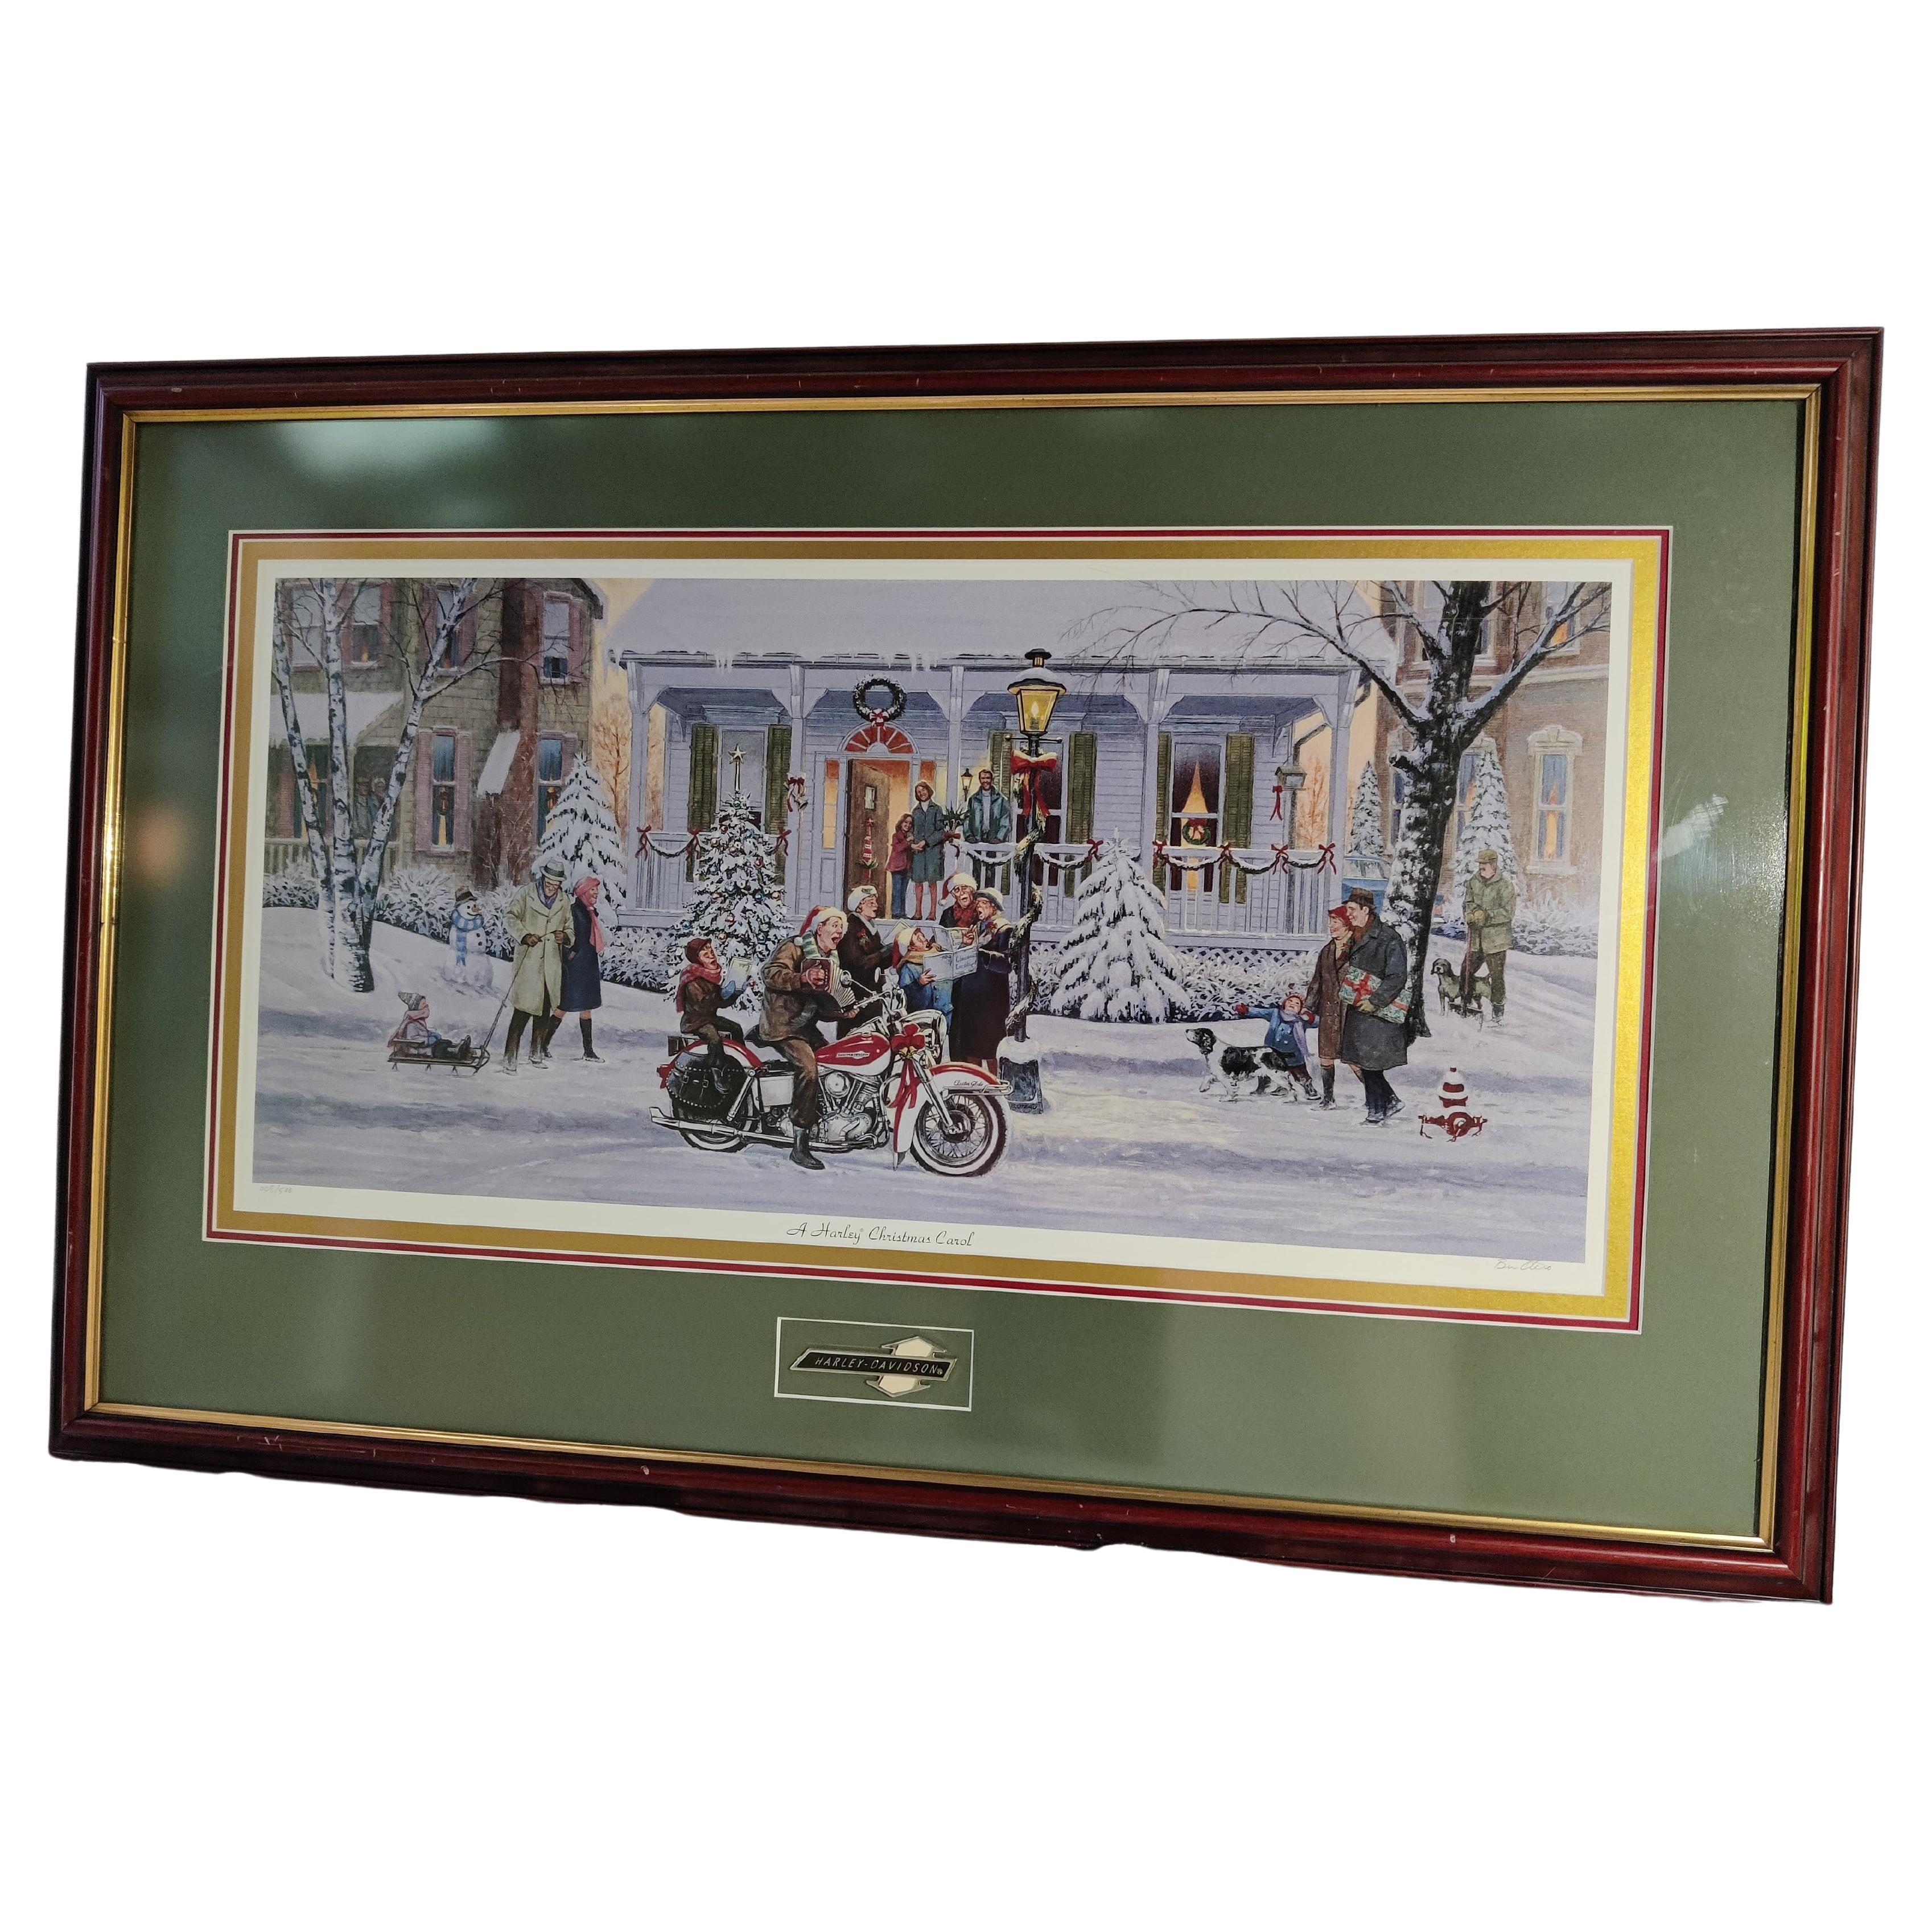 Harley Davidson Christmas print by artist Ben Otero signed and numbered 008/500